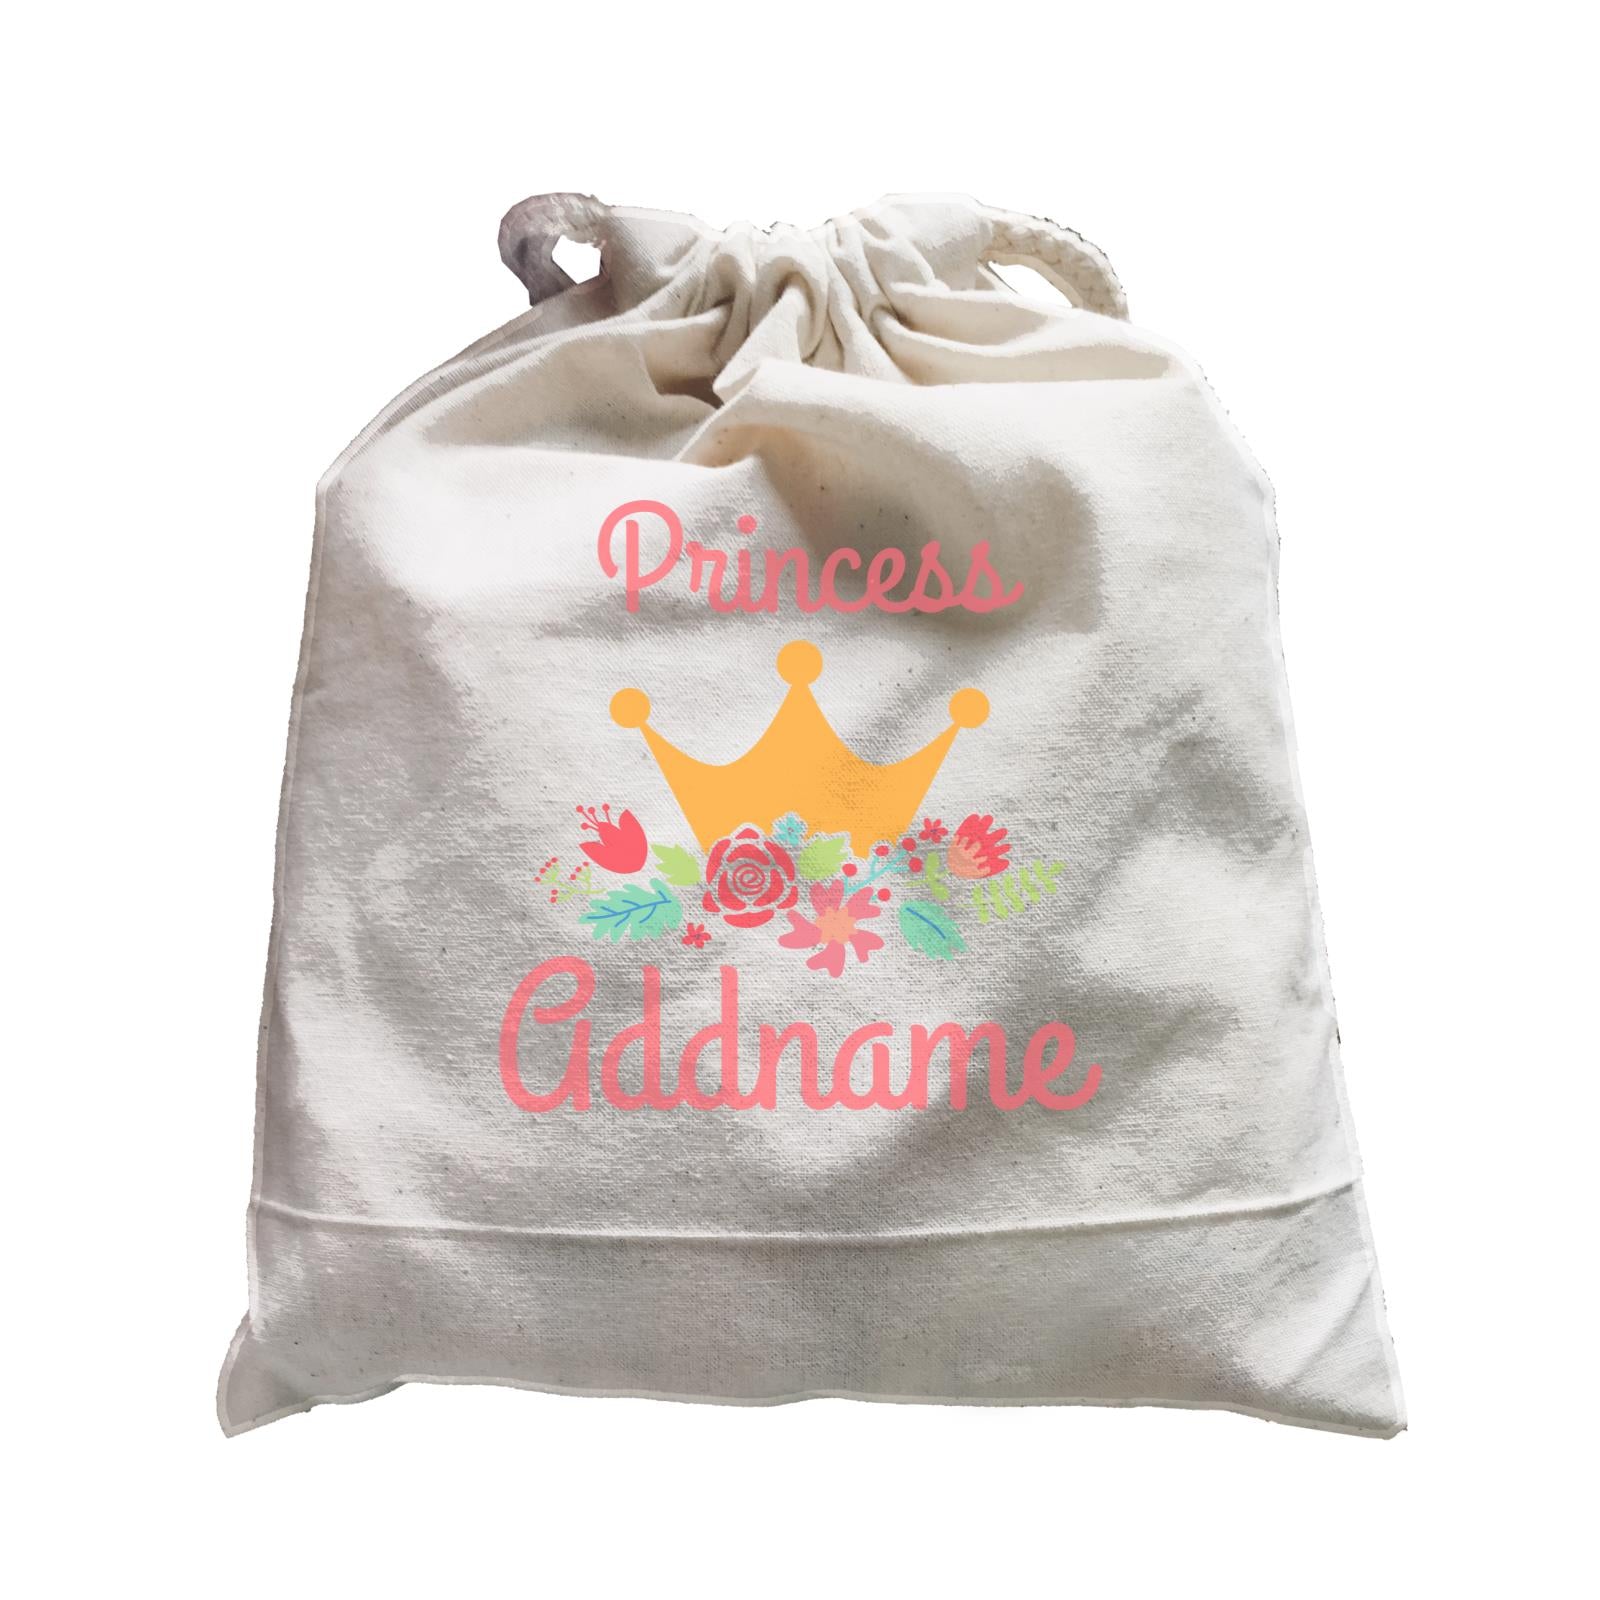 Princess Addname with Tiara and Flowers Satchel